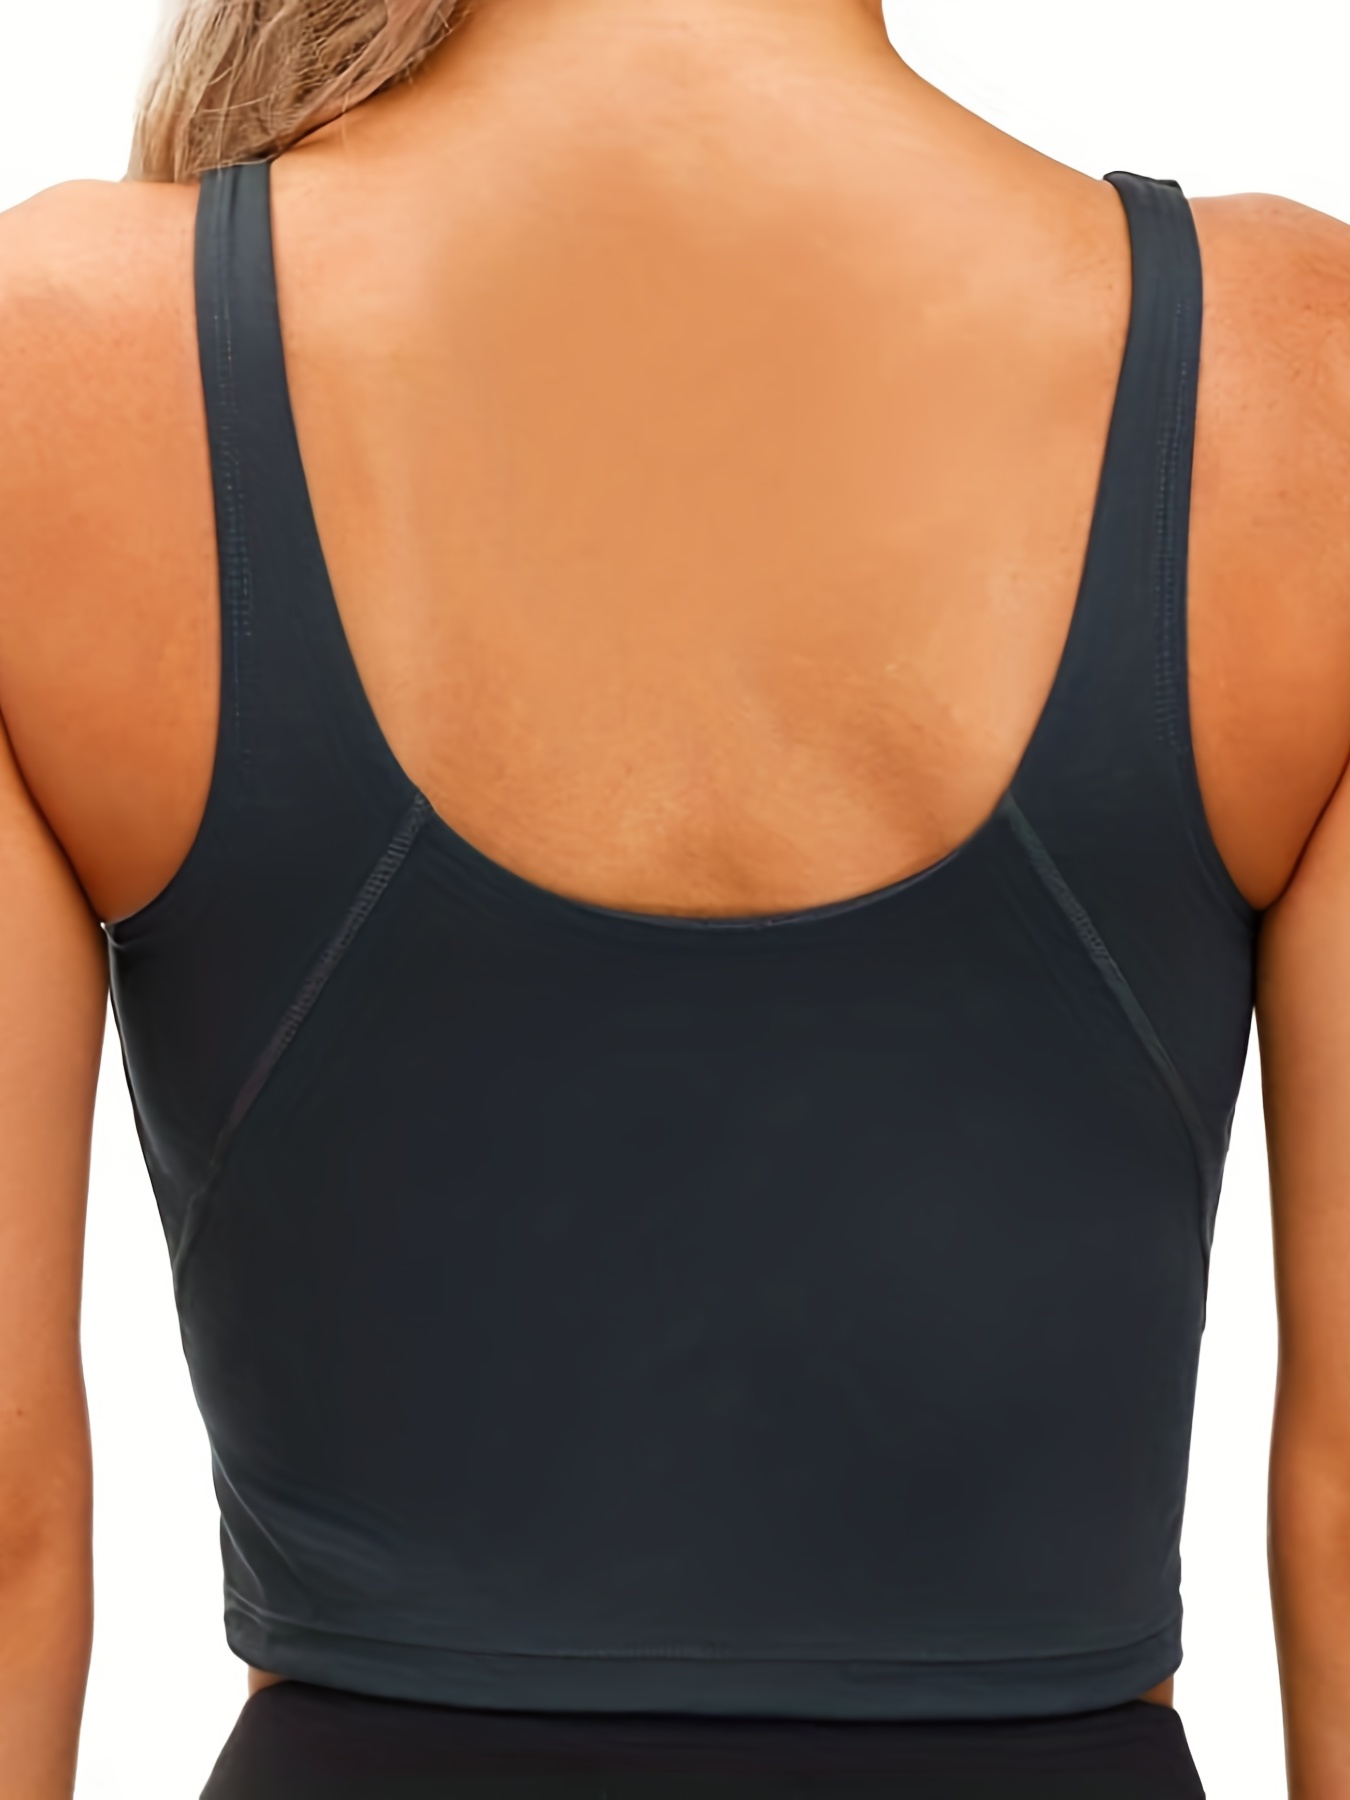 AIMTYD Sports Bra for Women, Stretchy Long Line Medium Support